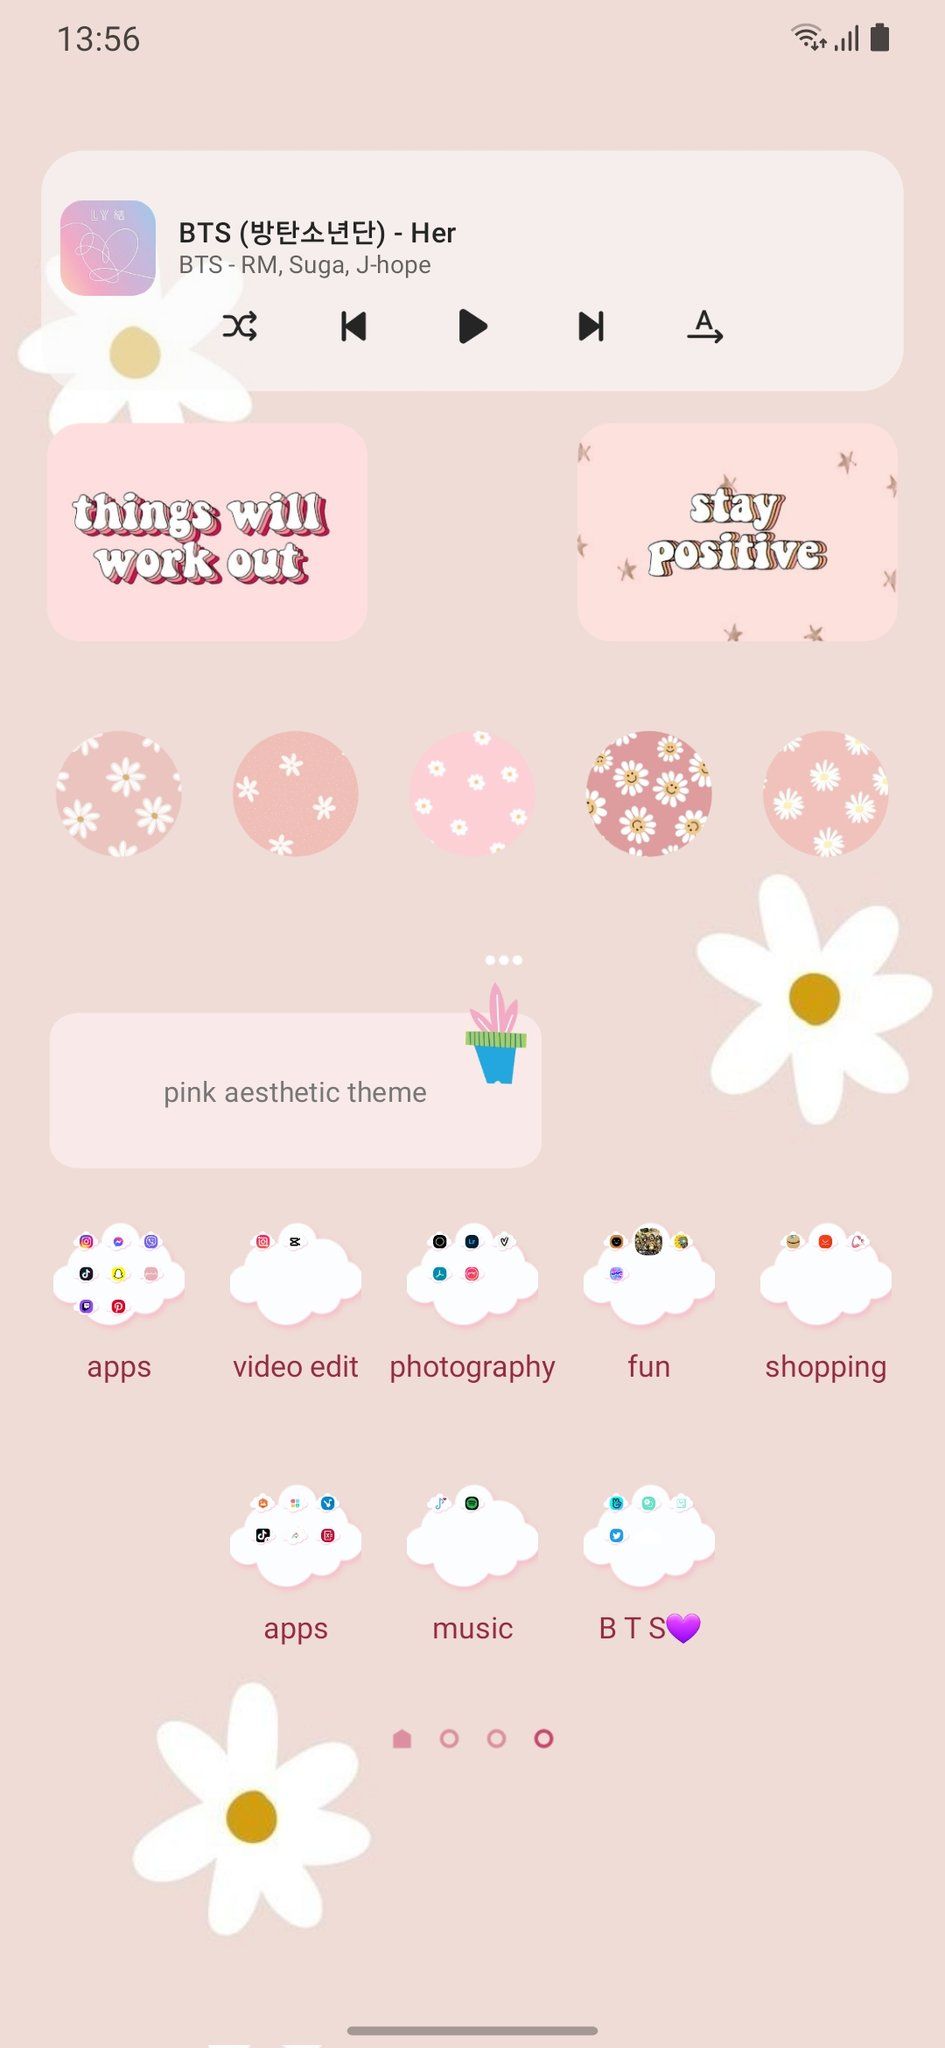 A screenshot of an app with pink and white flowers - Cute pink